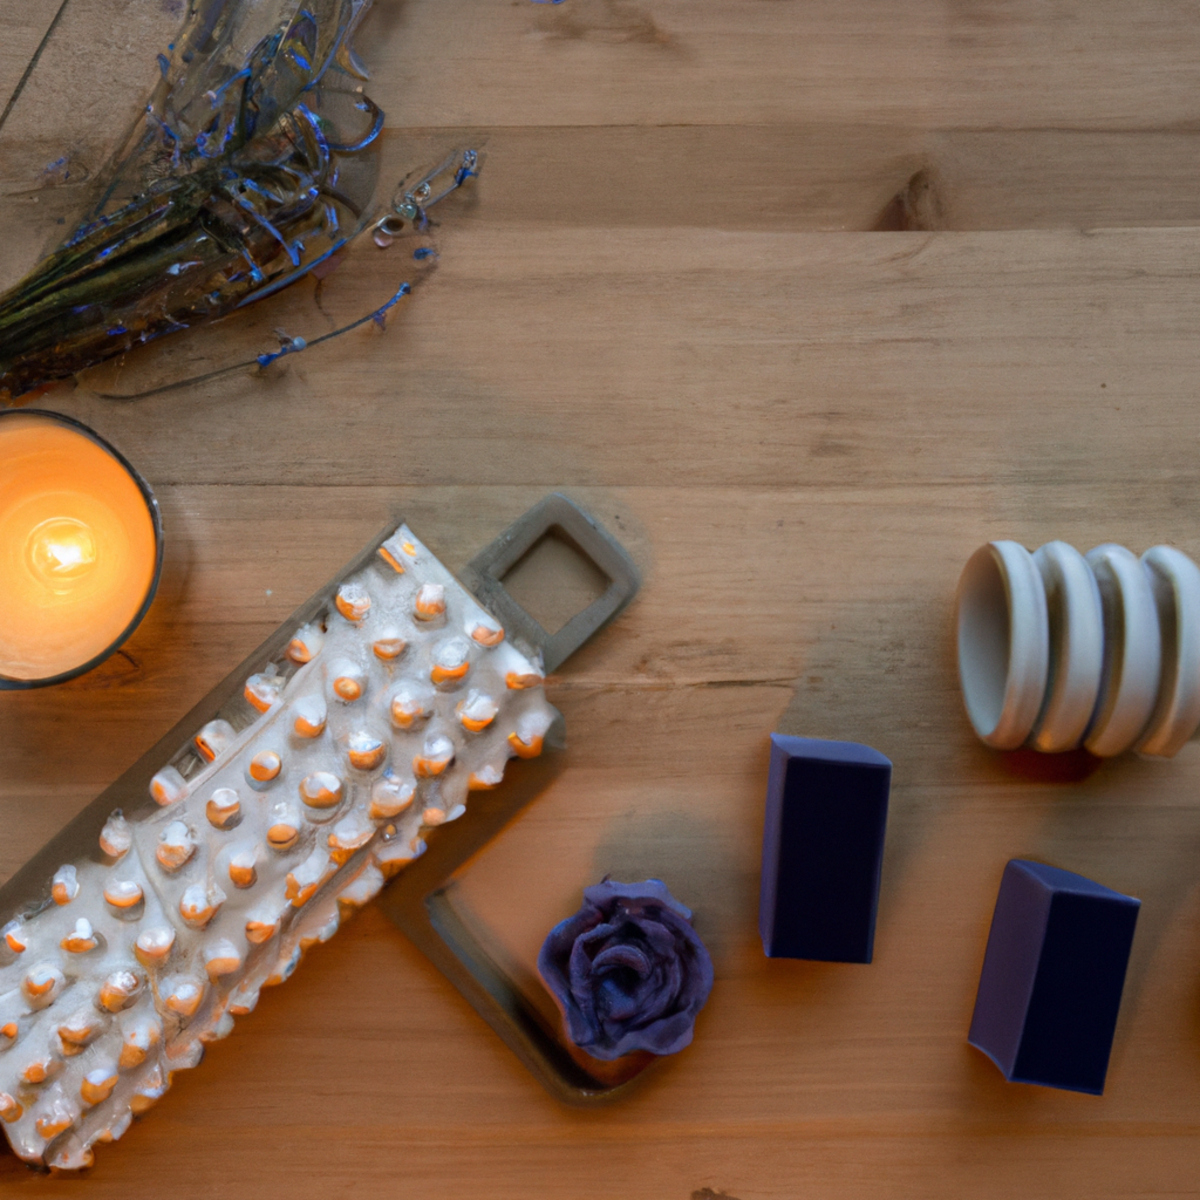 Stress-relief objects on wooden table: foam roller, candles, stress balls. Gym in background. Calming post-game routine.